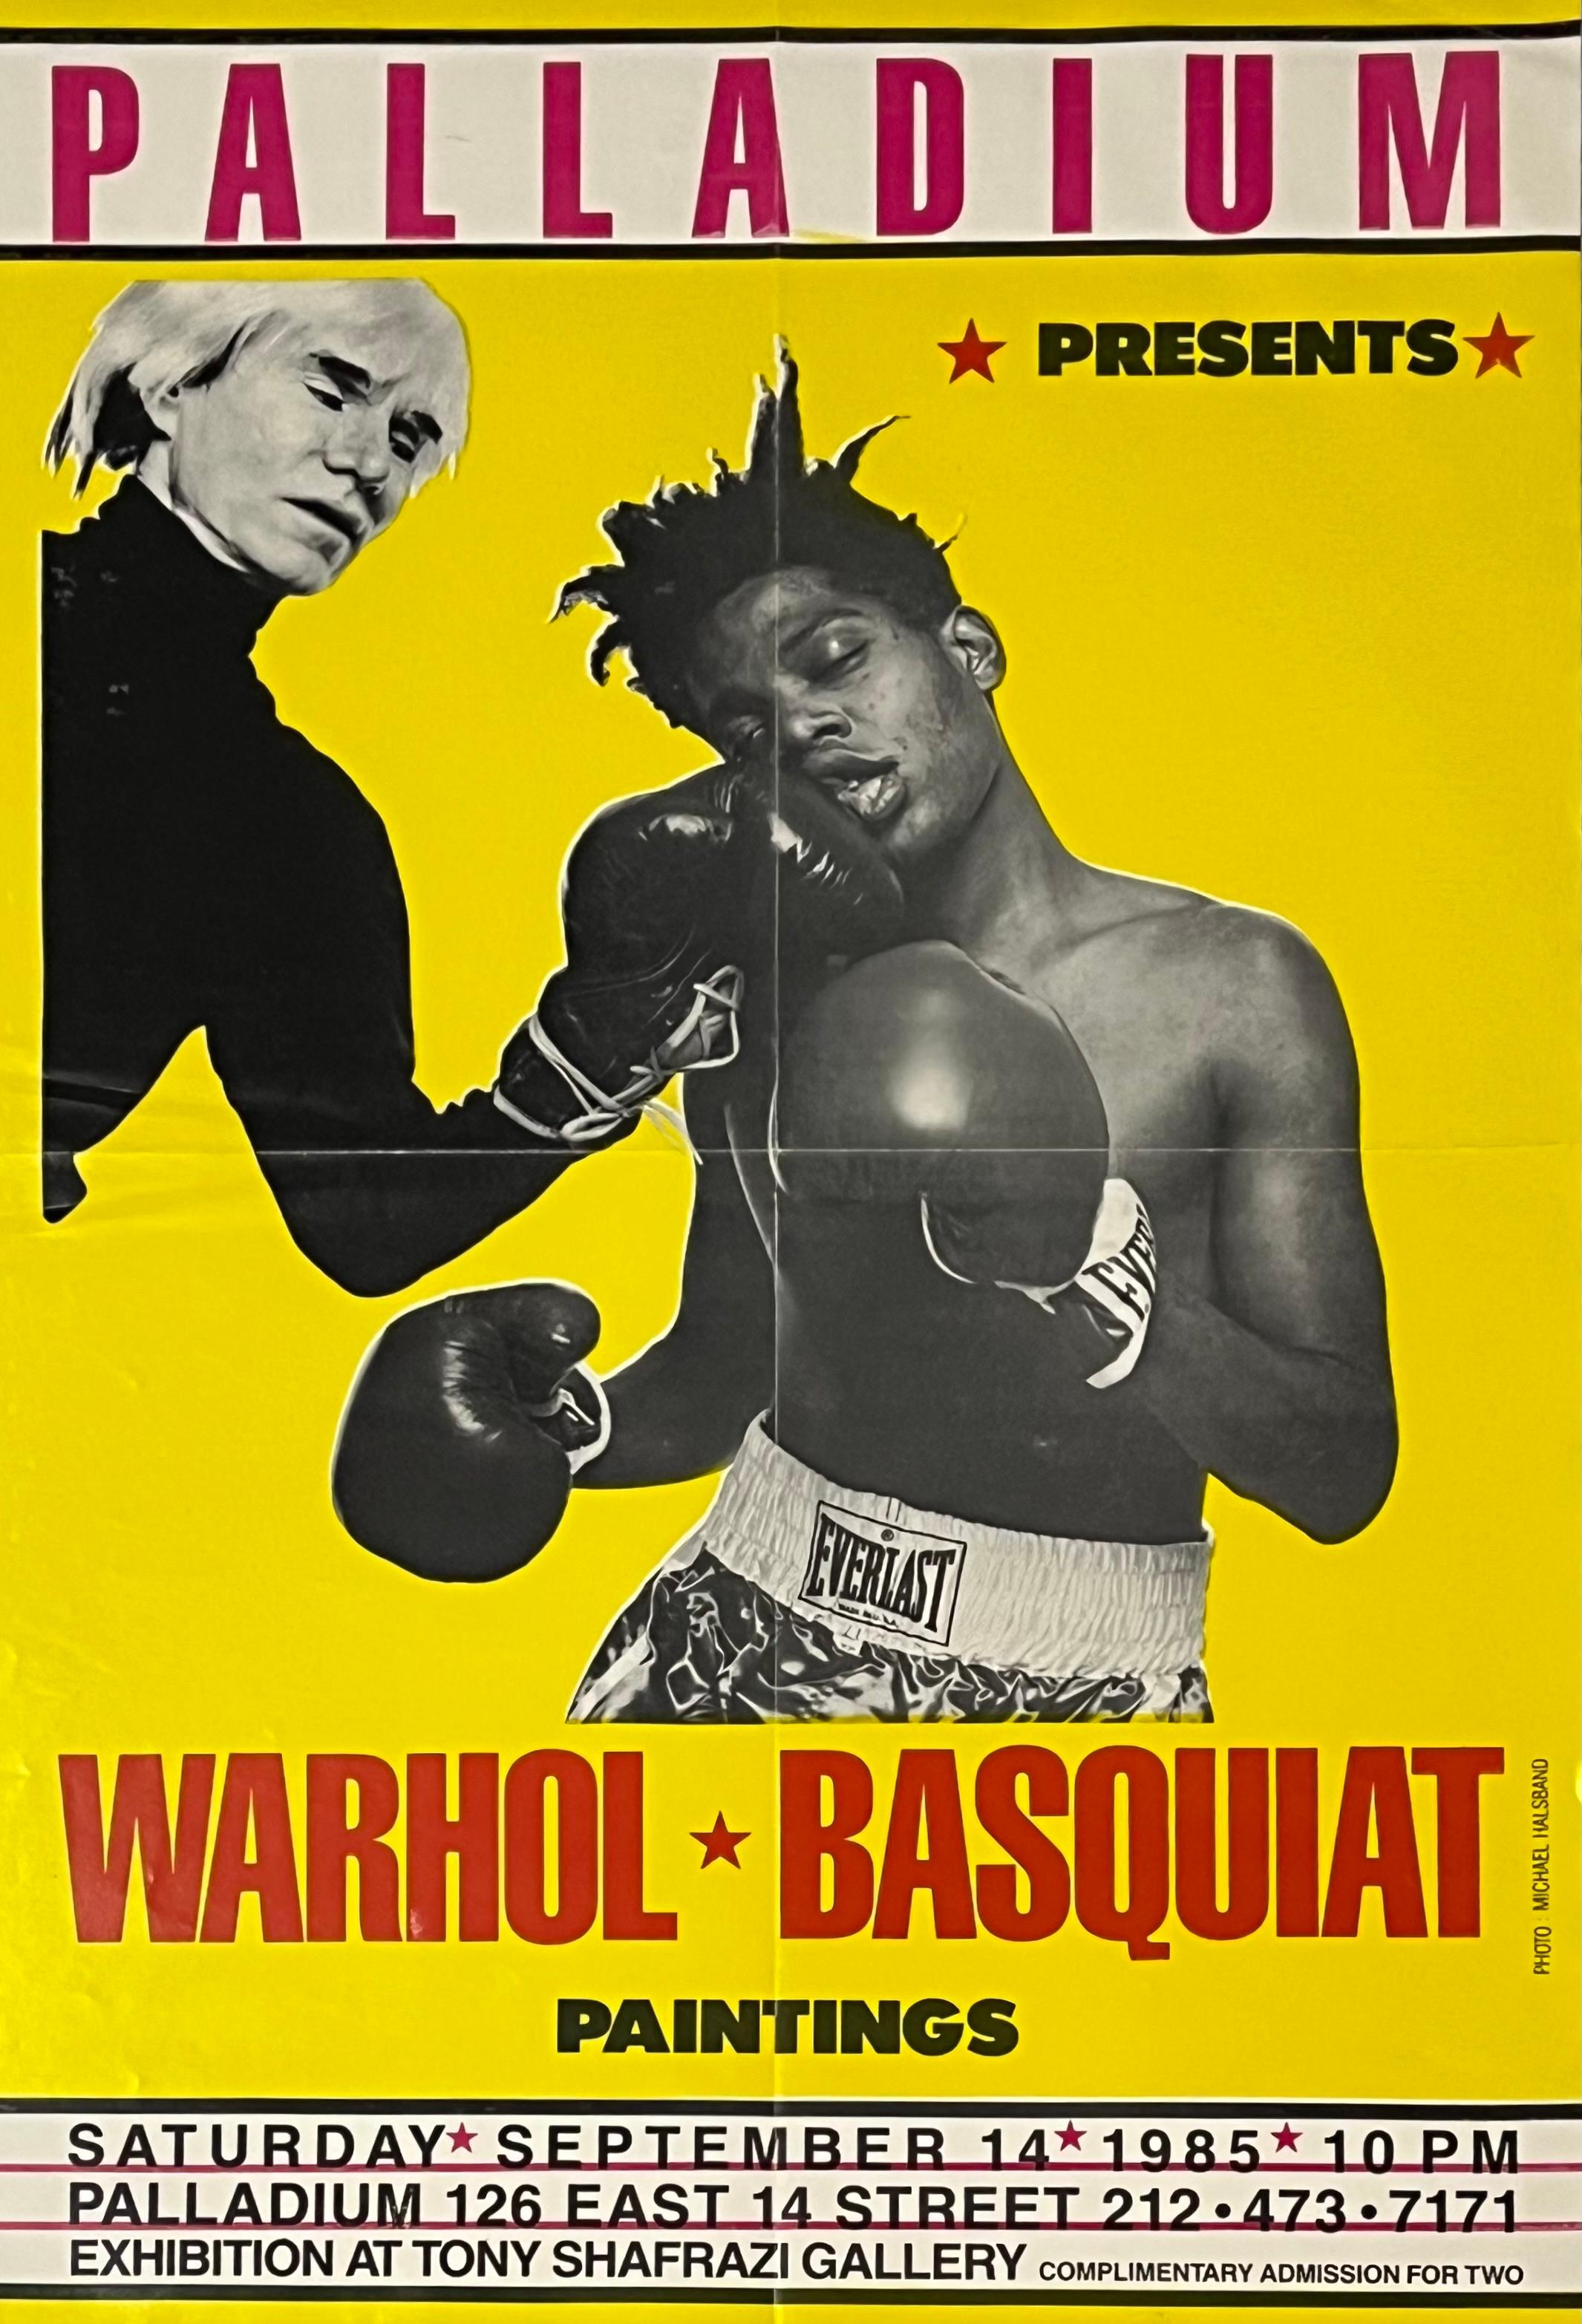 Andy Warhol Jean-Michel Basquiat Boxing posters 1985: Complete set of 2 works: 
The most sought-after Basquiat/Warhol collectibles in existence - presented as a complete set of 2. Published by Tony Shafrazi and Bruno Bischofberger on the occasion of